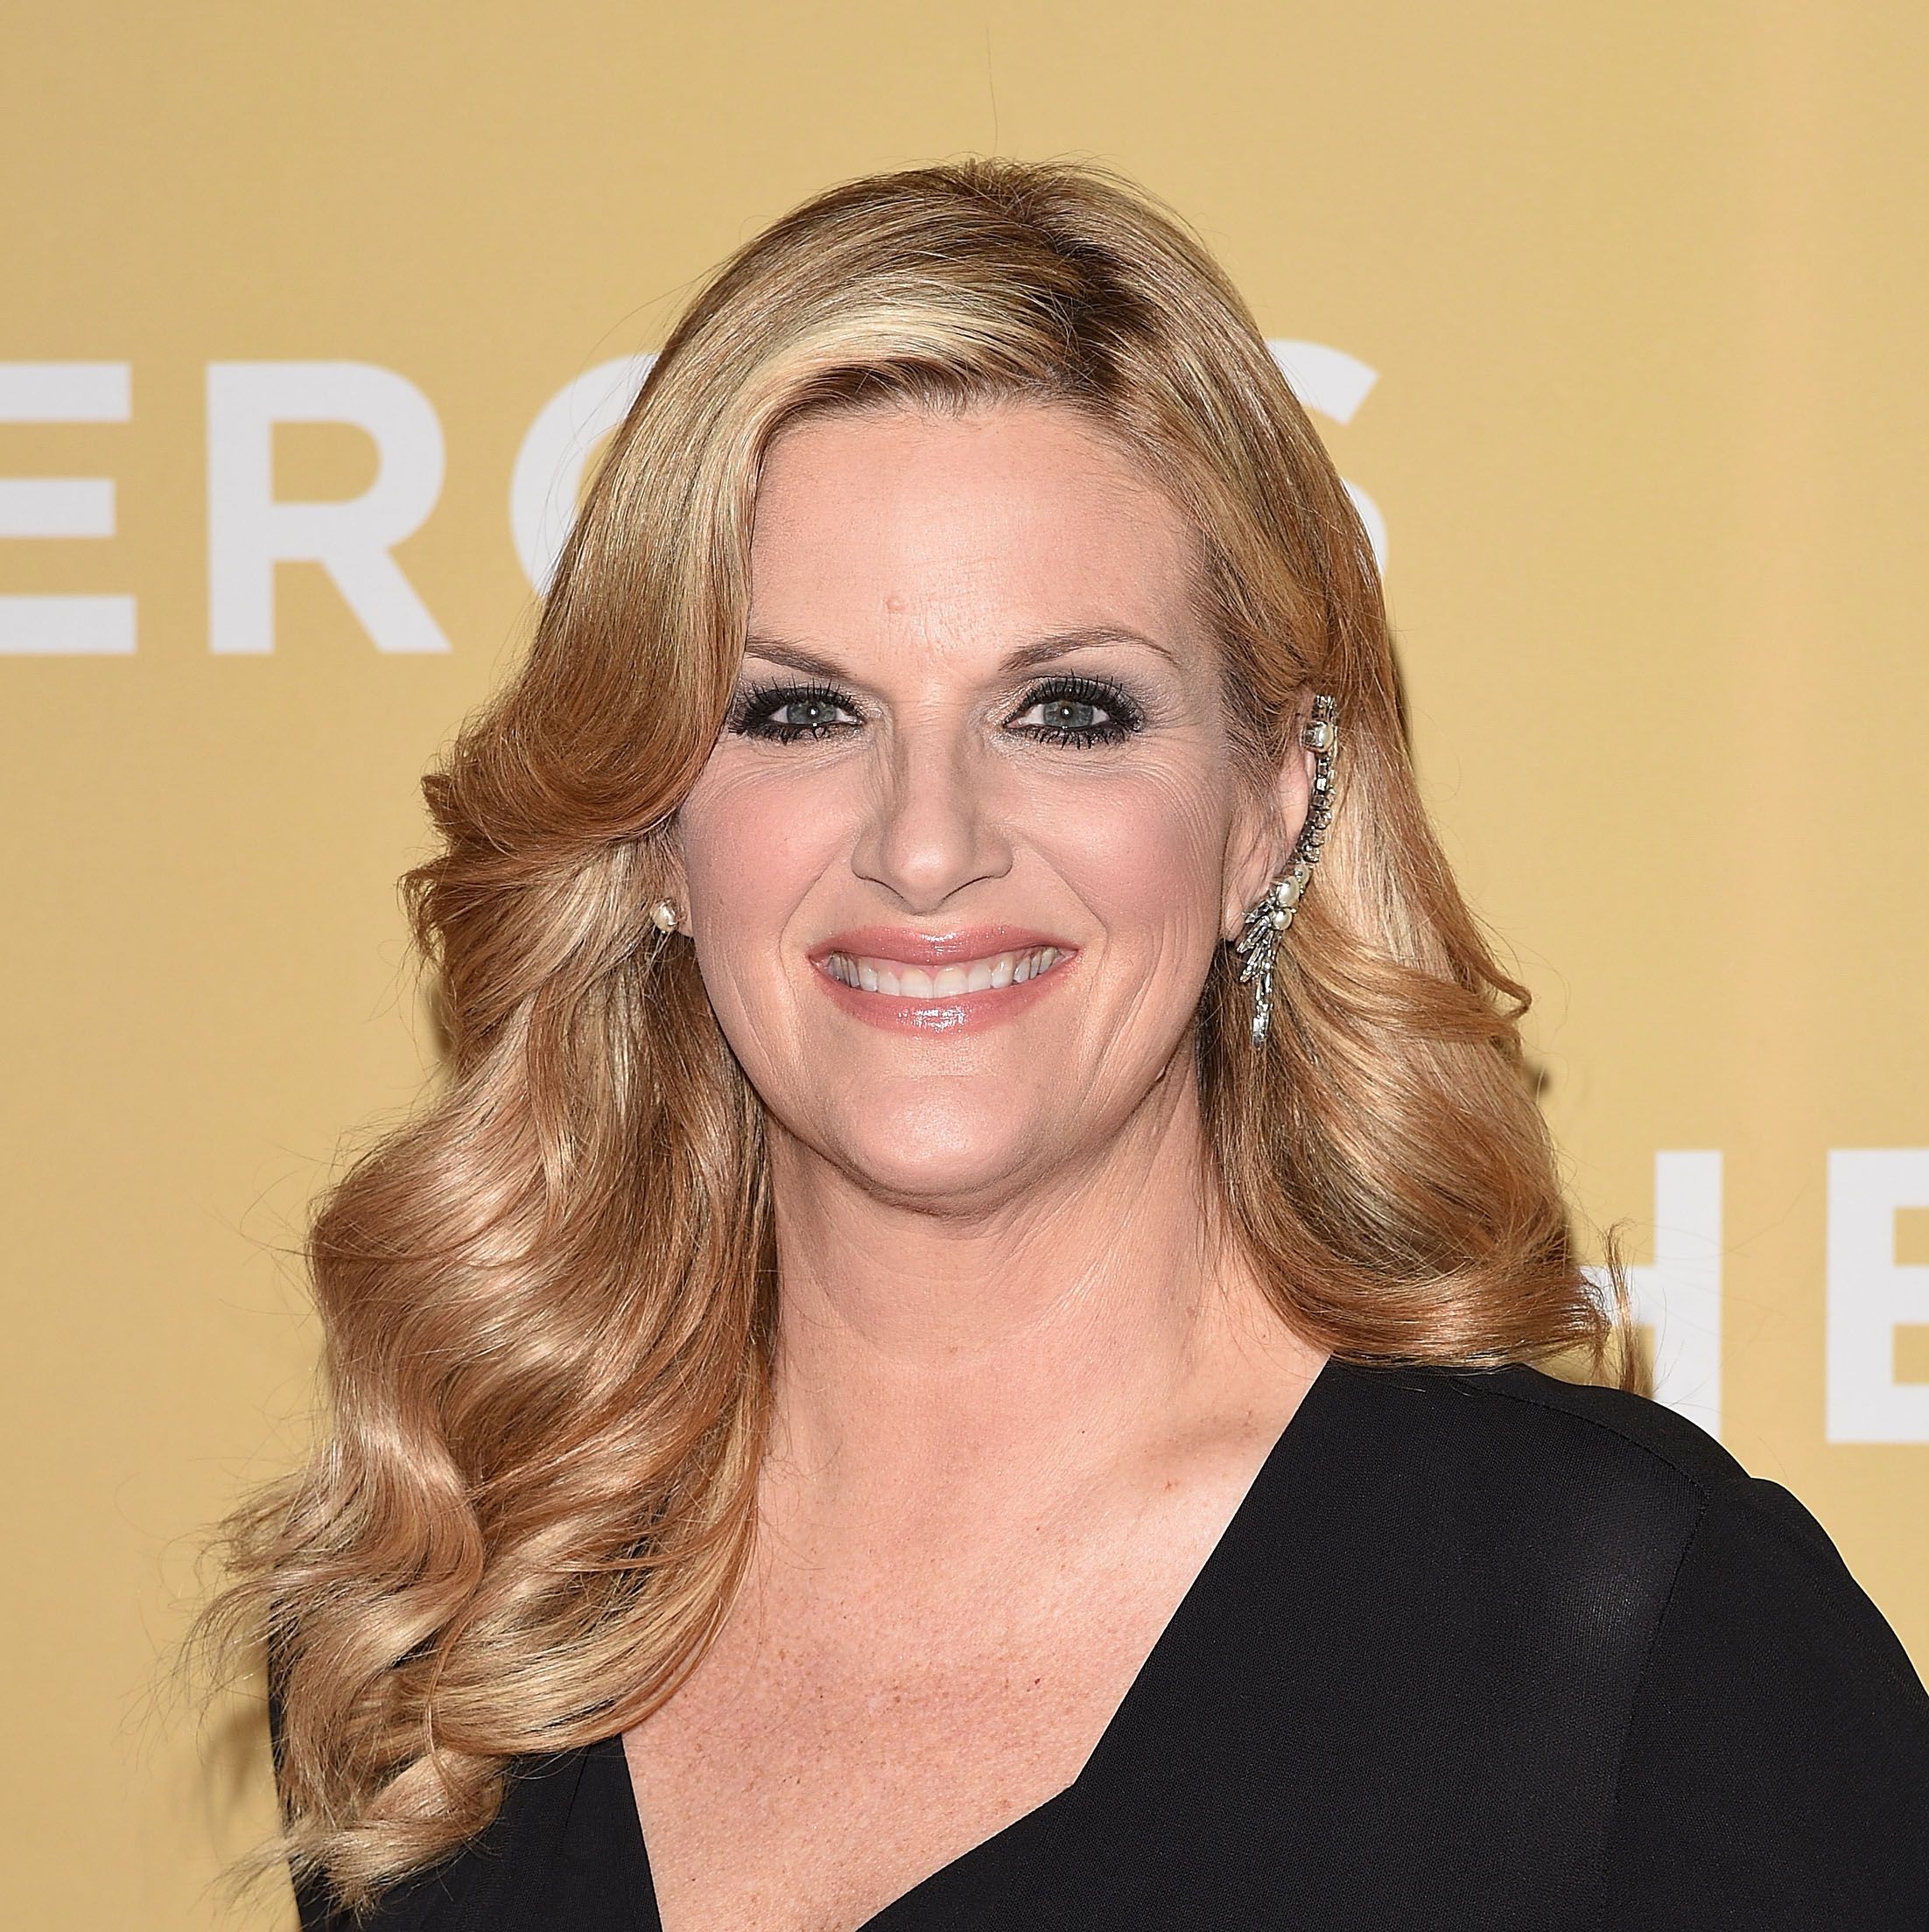 Trisha Yearwood Fans Go Wild After the Singer Debuts Dramatic Haircut